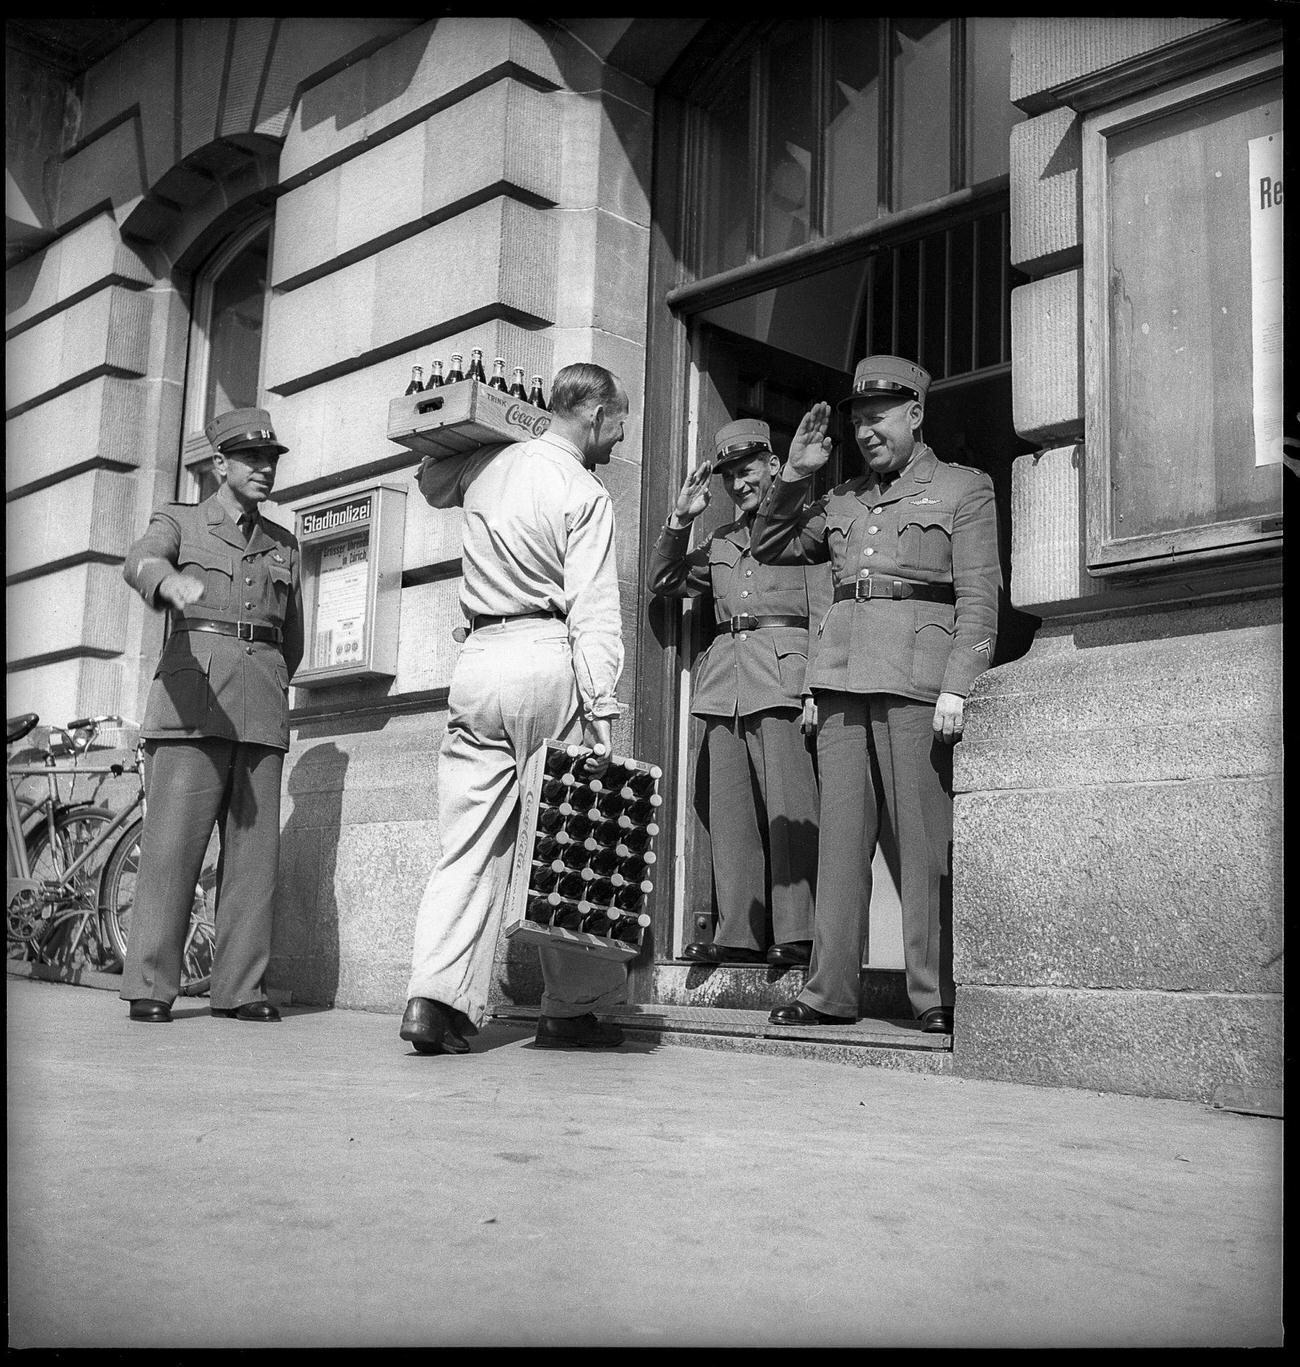 Coca-Cola delivery to the city police, 1948.